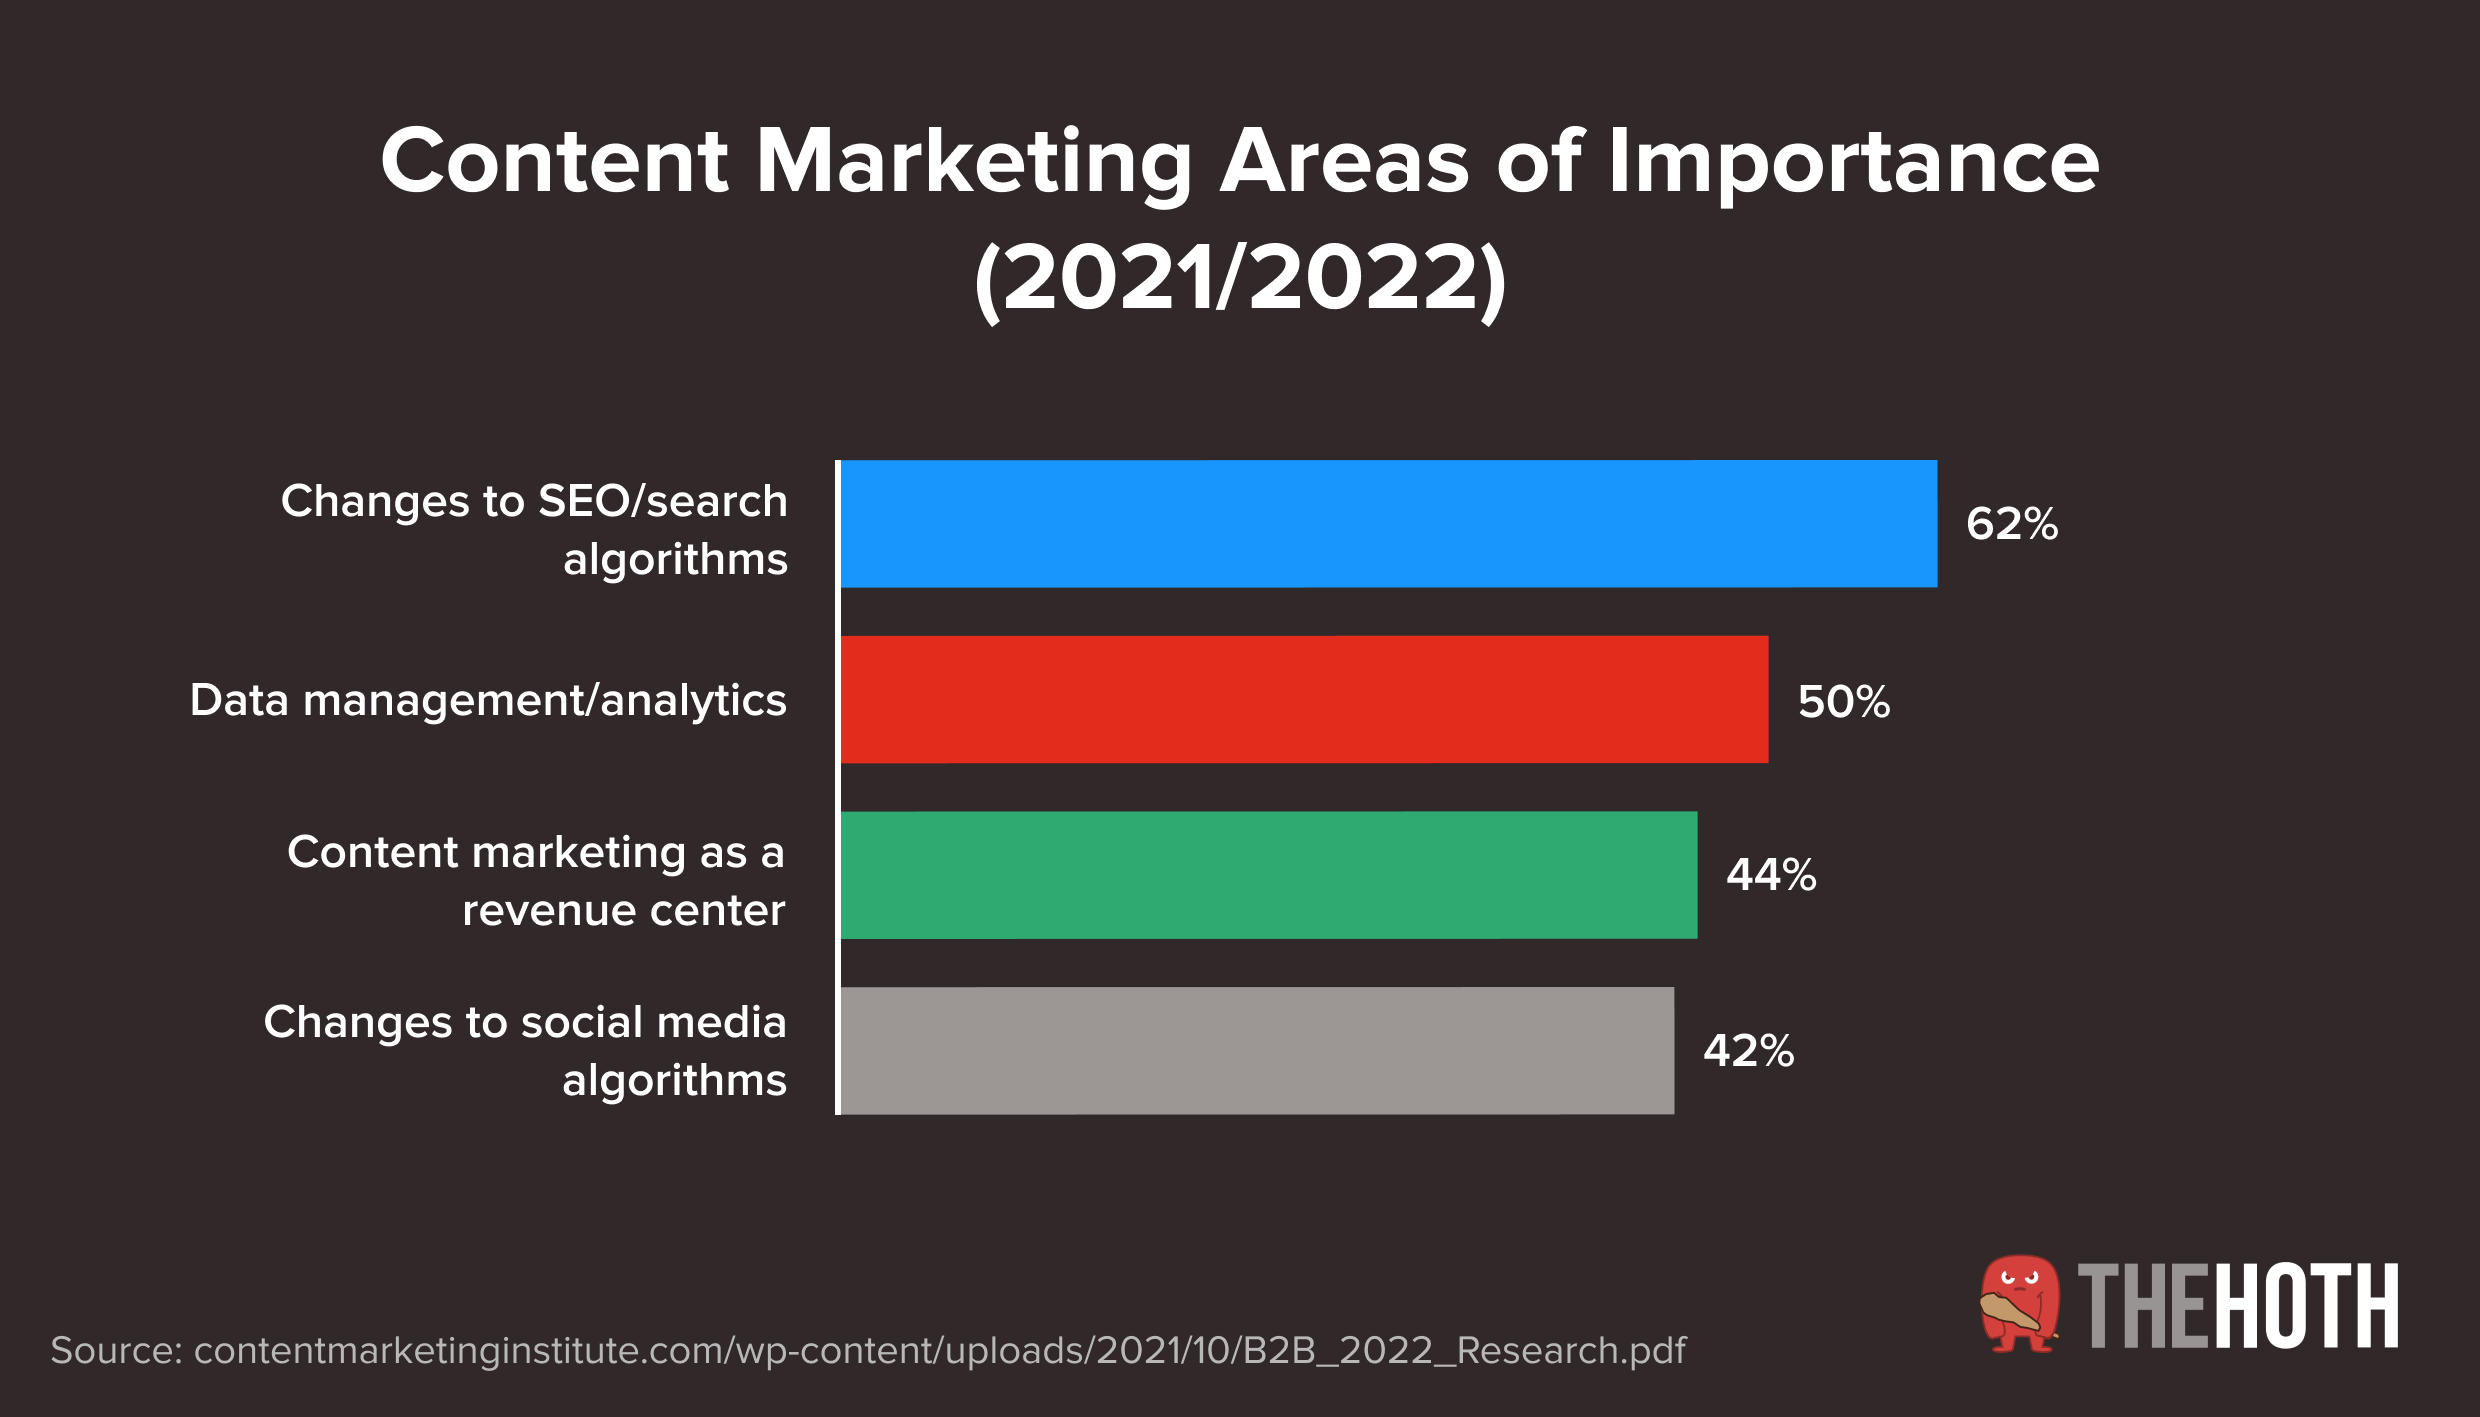 Areas of importance in content marketing